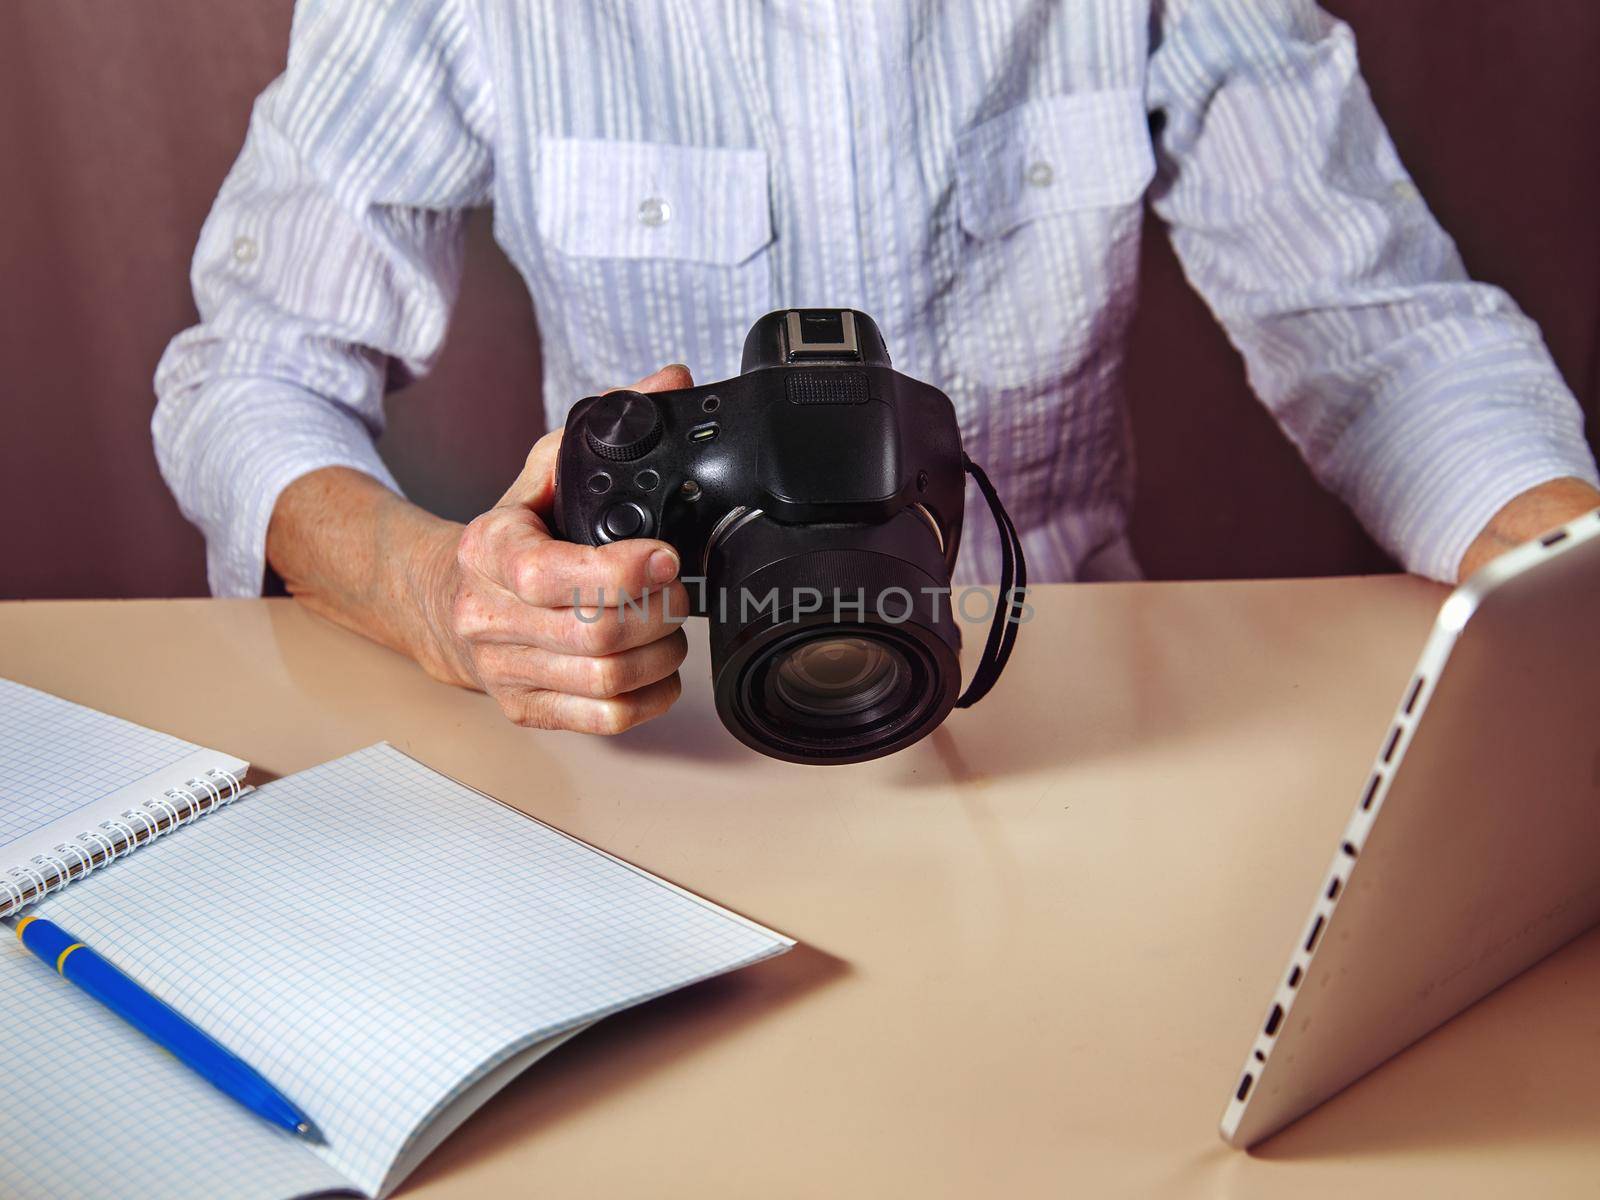 Online training. Tablet, camera, notepad, pen on white table by Sestra